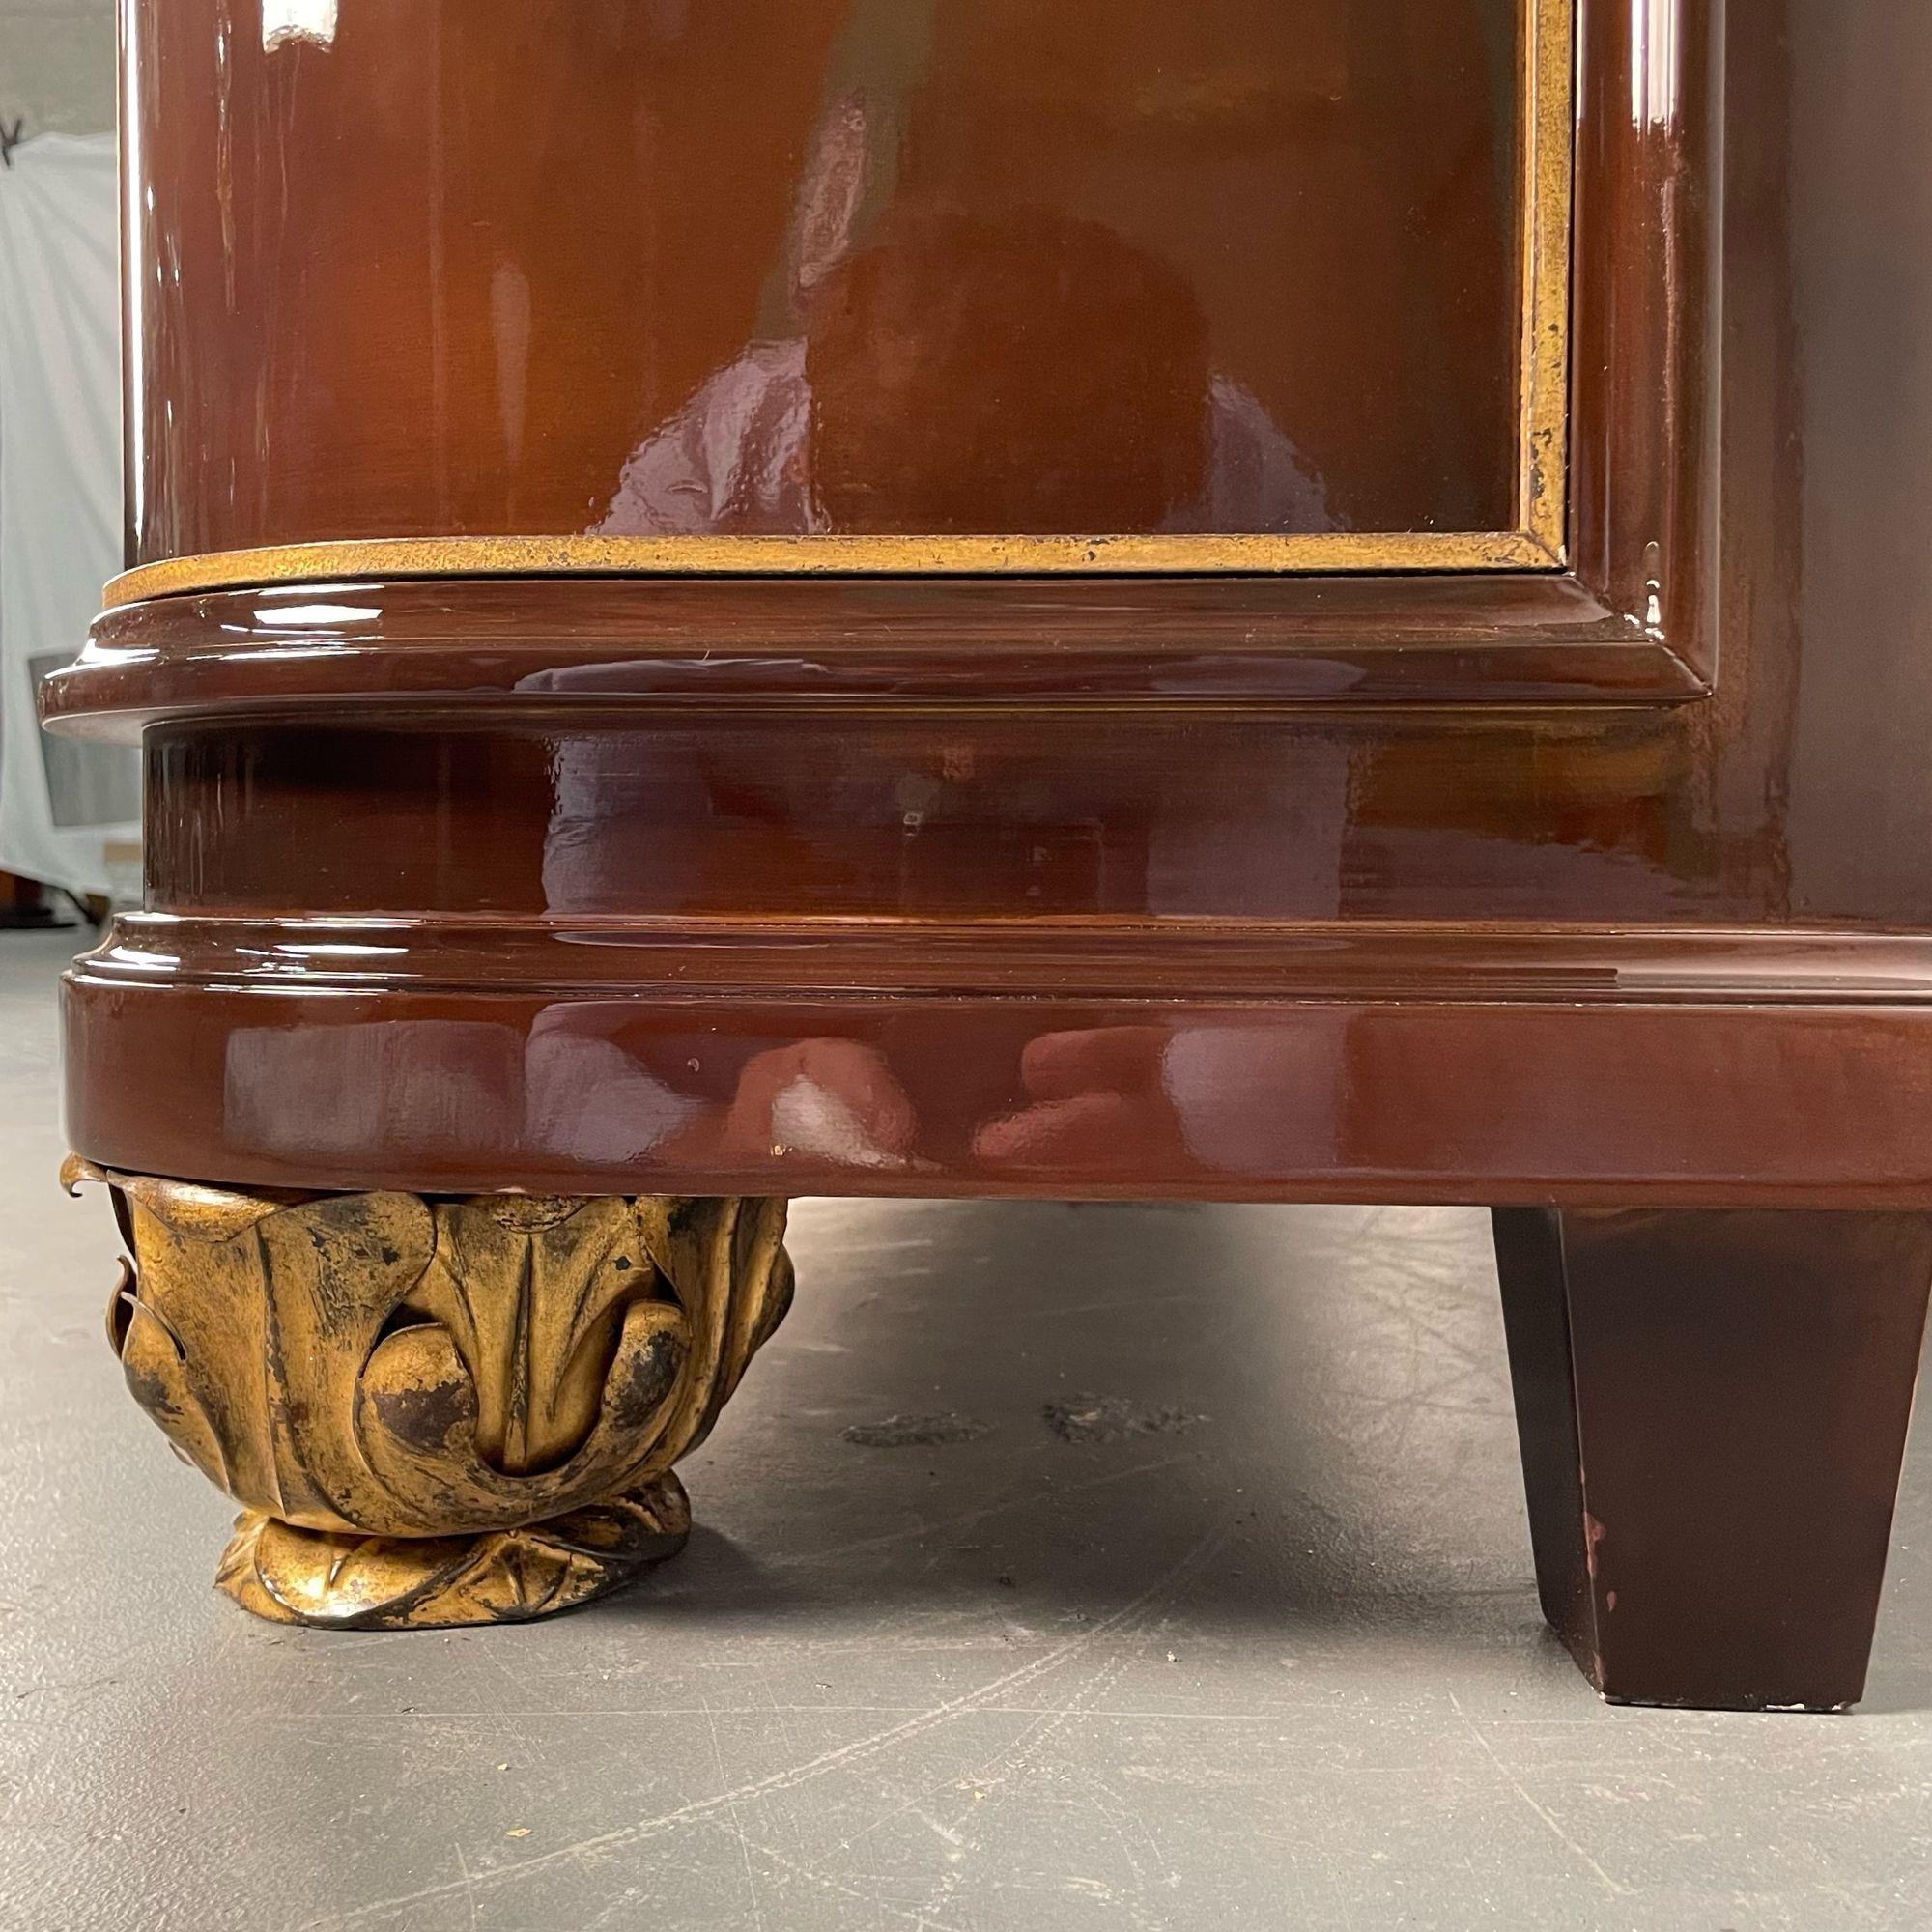 Rene Drouet, French Art Deco, Sideboard, Brown Lacquer, Gilt, France, 1940s For Sale 7